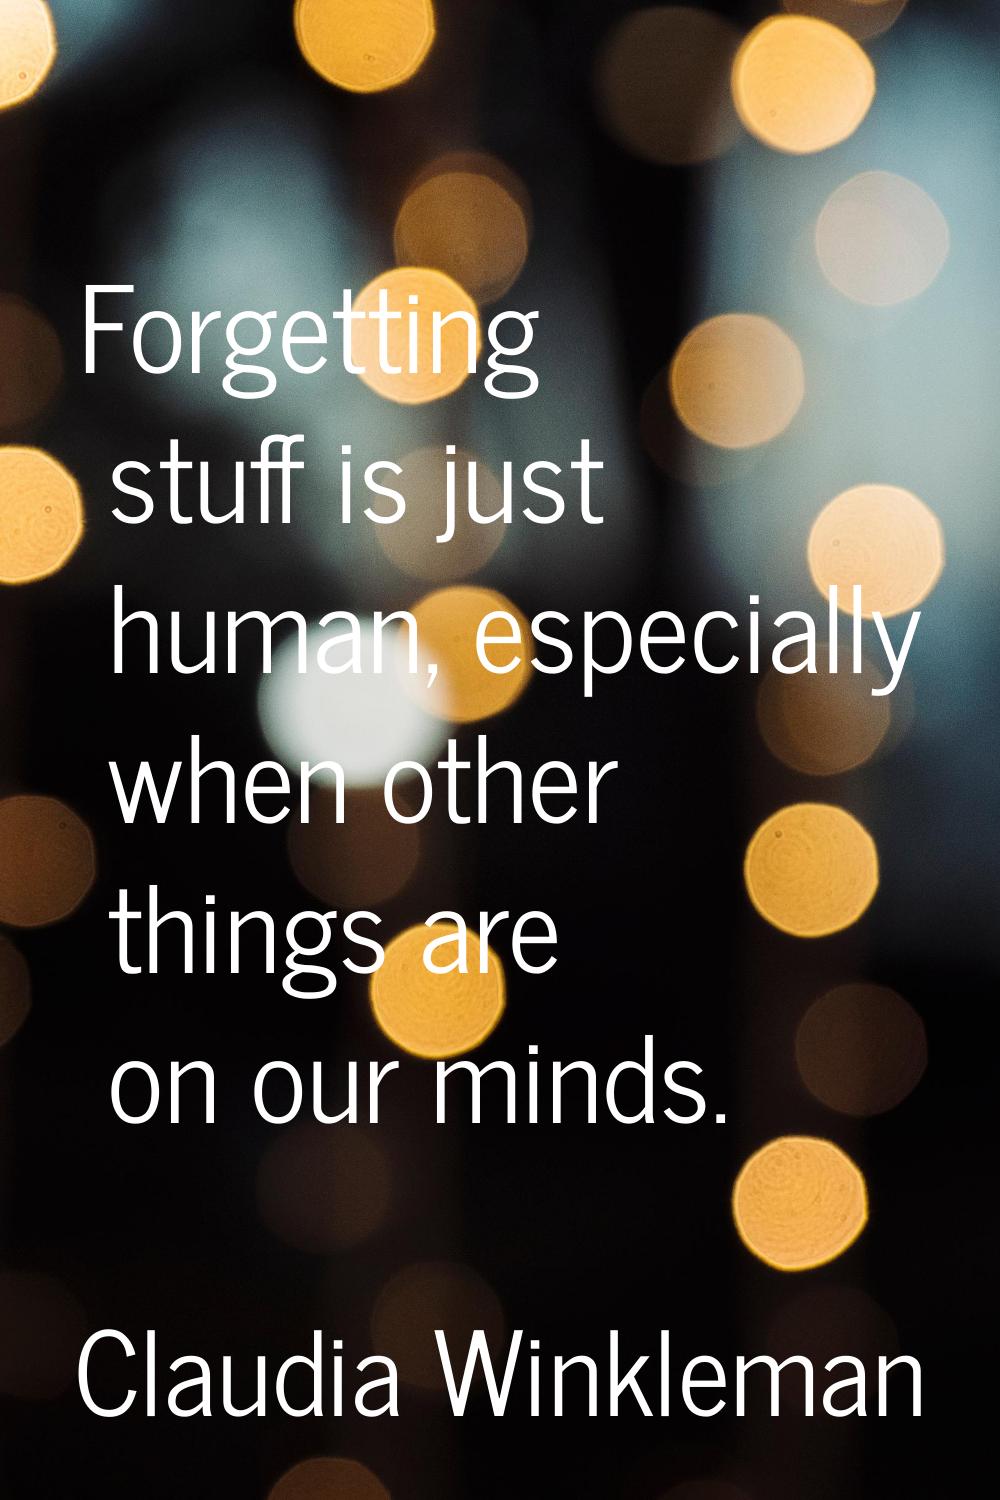 Forgetting stuff is just human, especially when other things are on our minds.